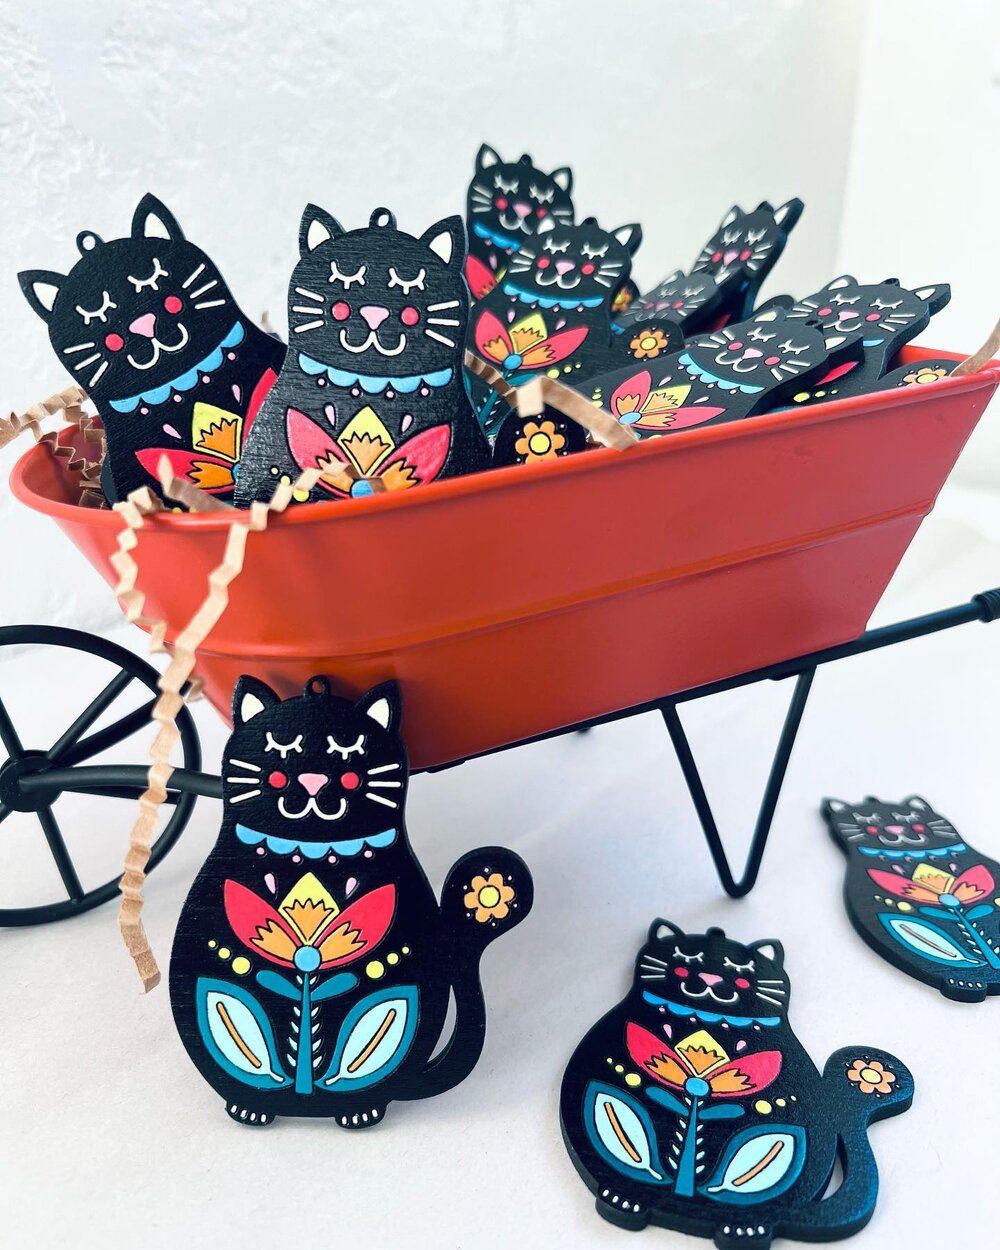 A load of kitties coming in your way! 🐈&zwj;⬛

Ahh, the beauty of Spring! With the fresh air, an array of vibrant blooms, who wouldn't be a bit anxious to get outside and enjoy the great outdoors?

For those of us stuck behind computer screens all d